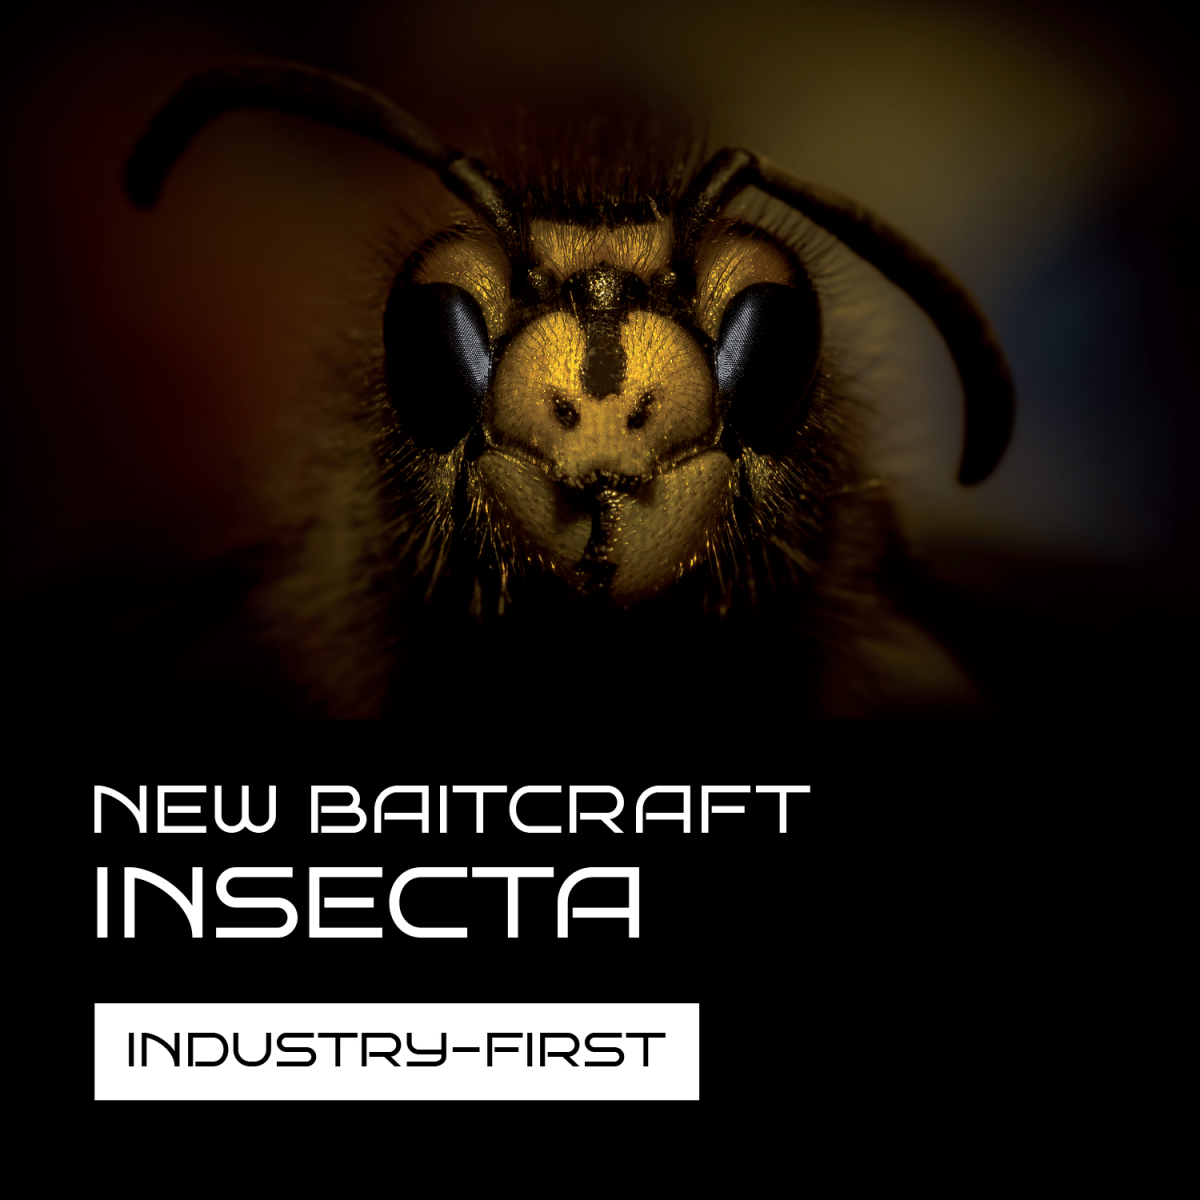 INSECTA HAS ARRIVED SPRING 2020